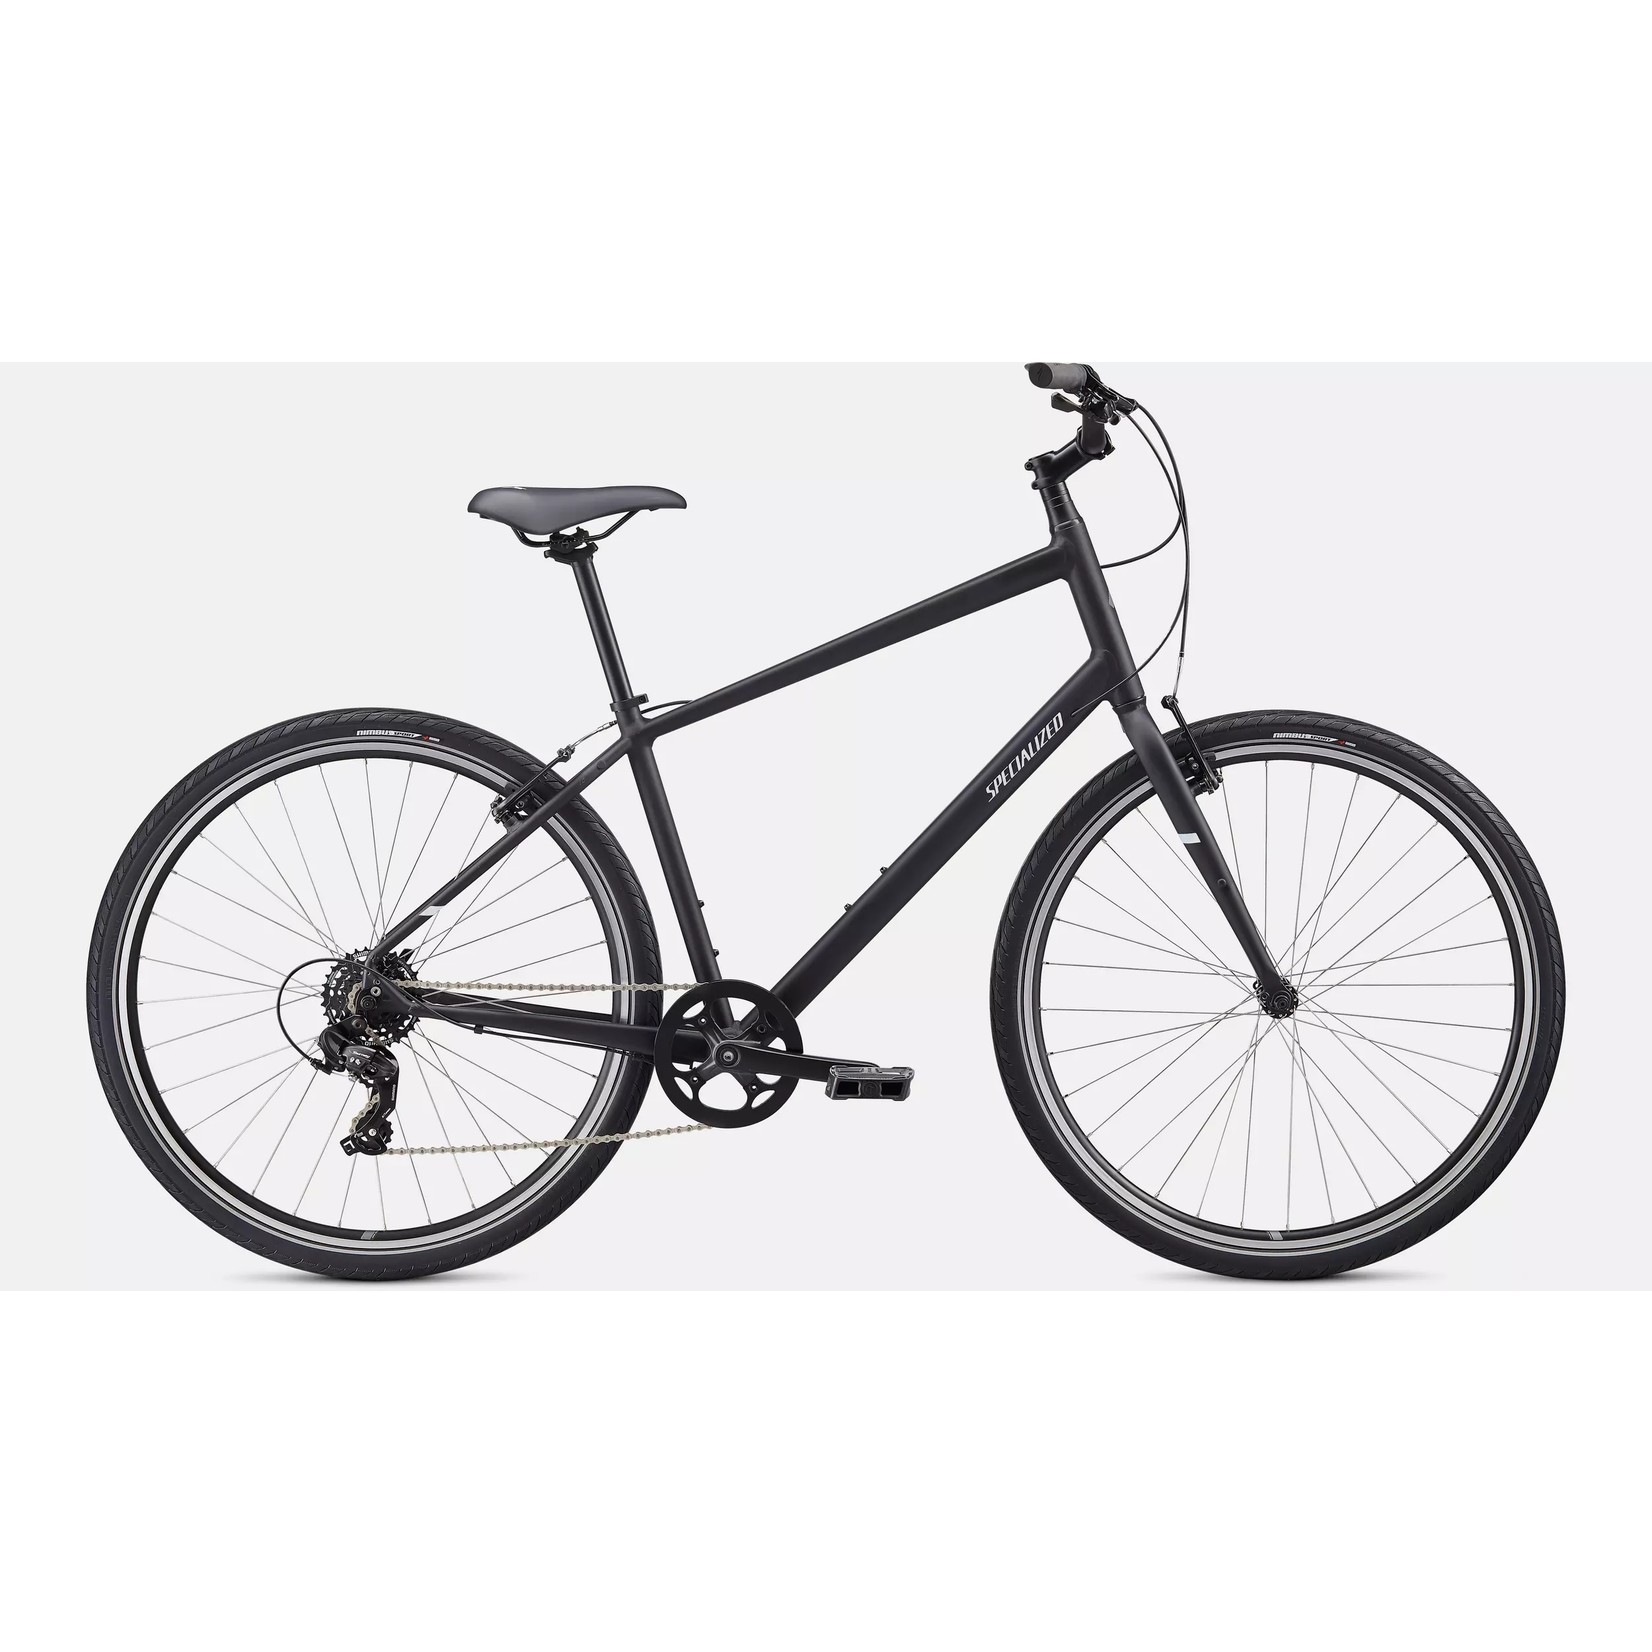 Specialized Specialized Crossroads 1.0 Black / Charcoal Reflective